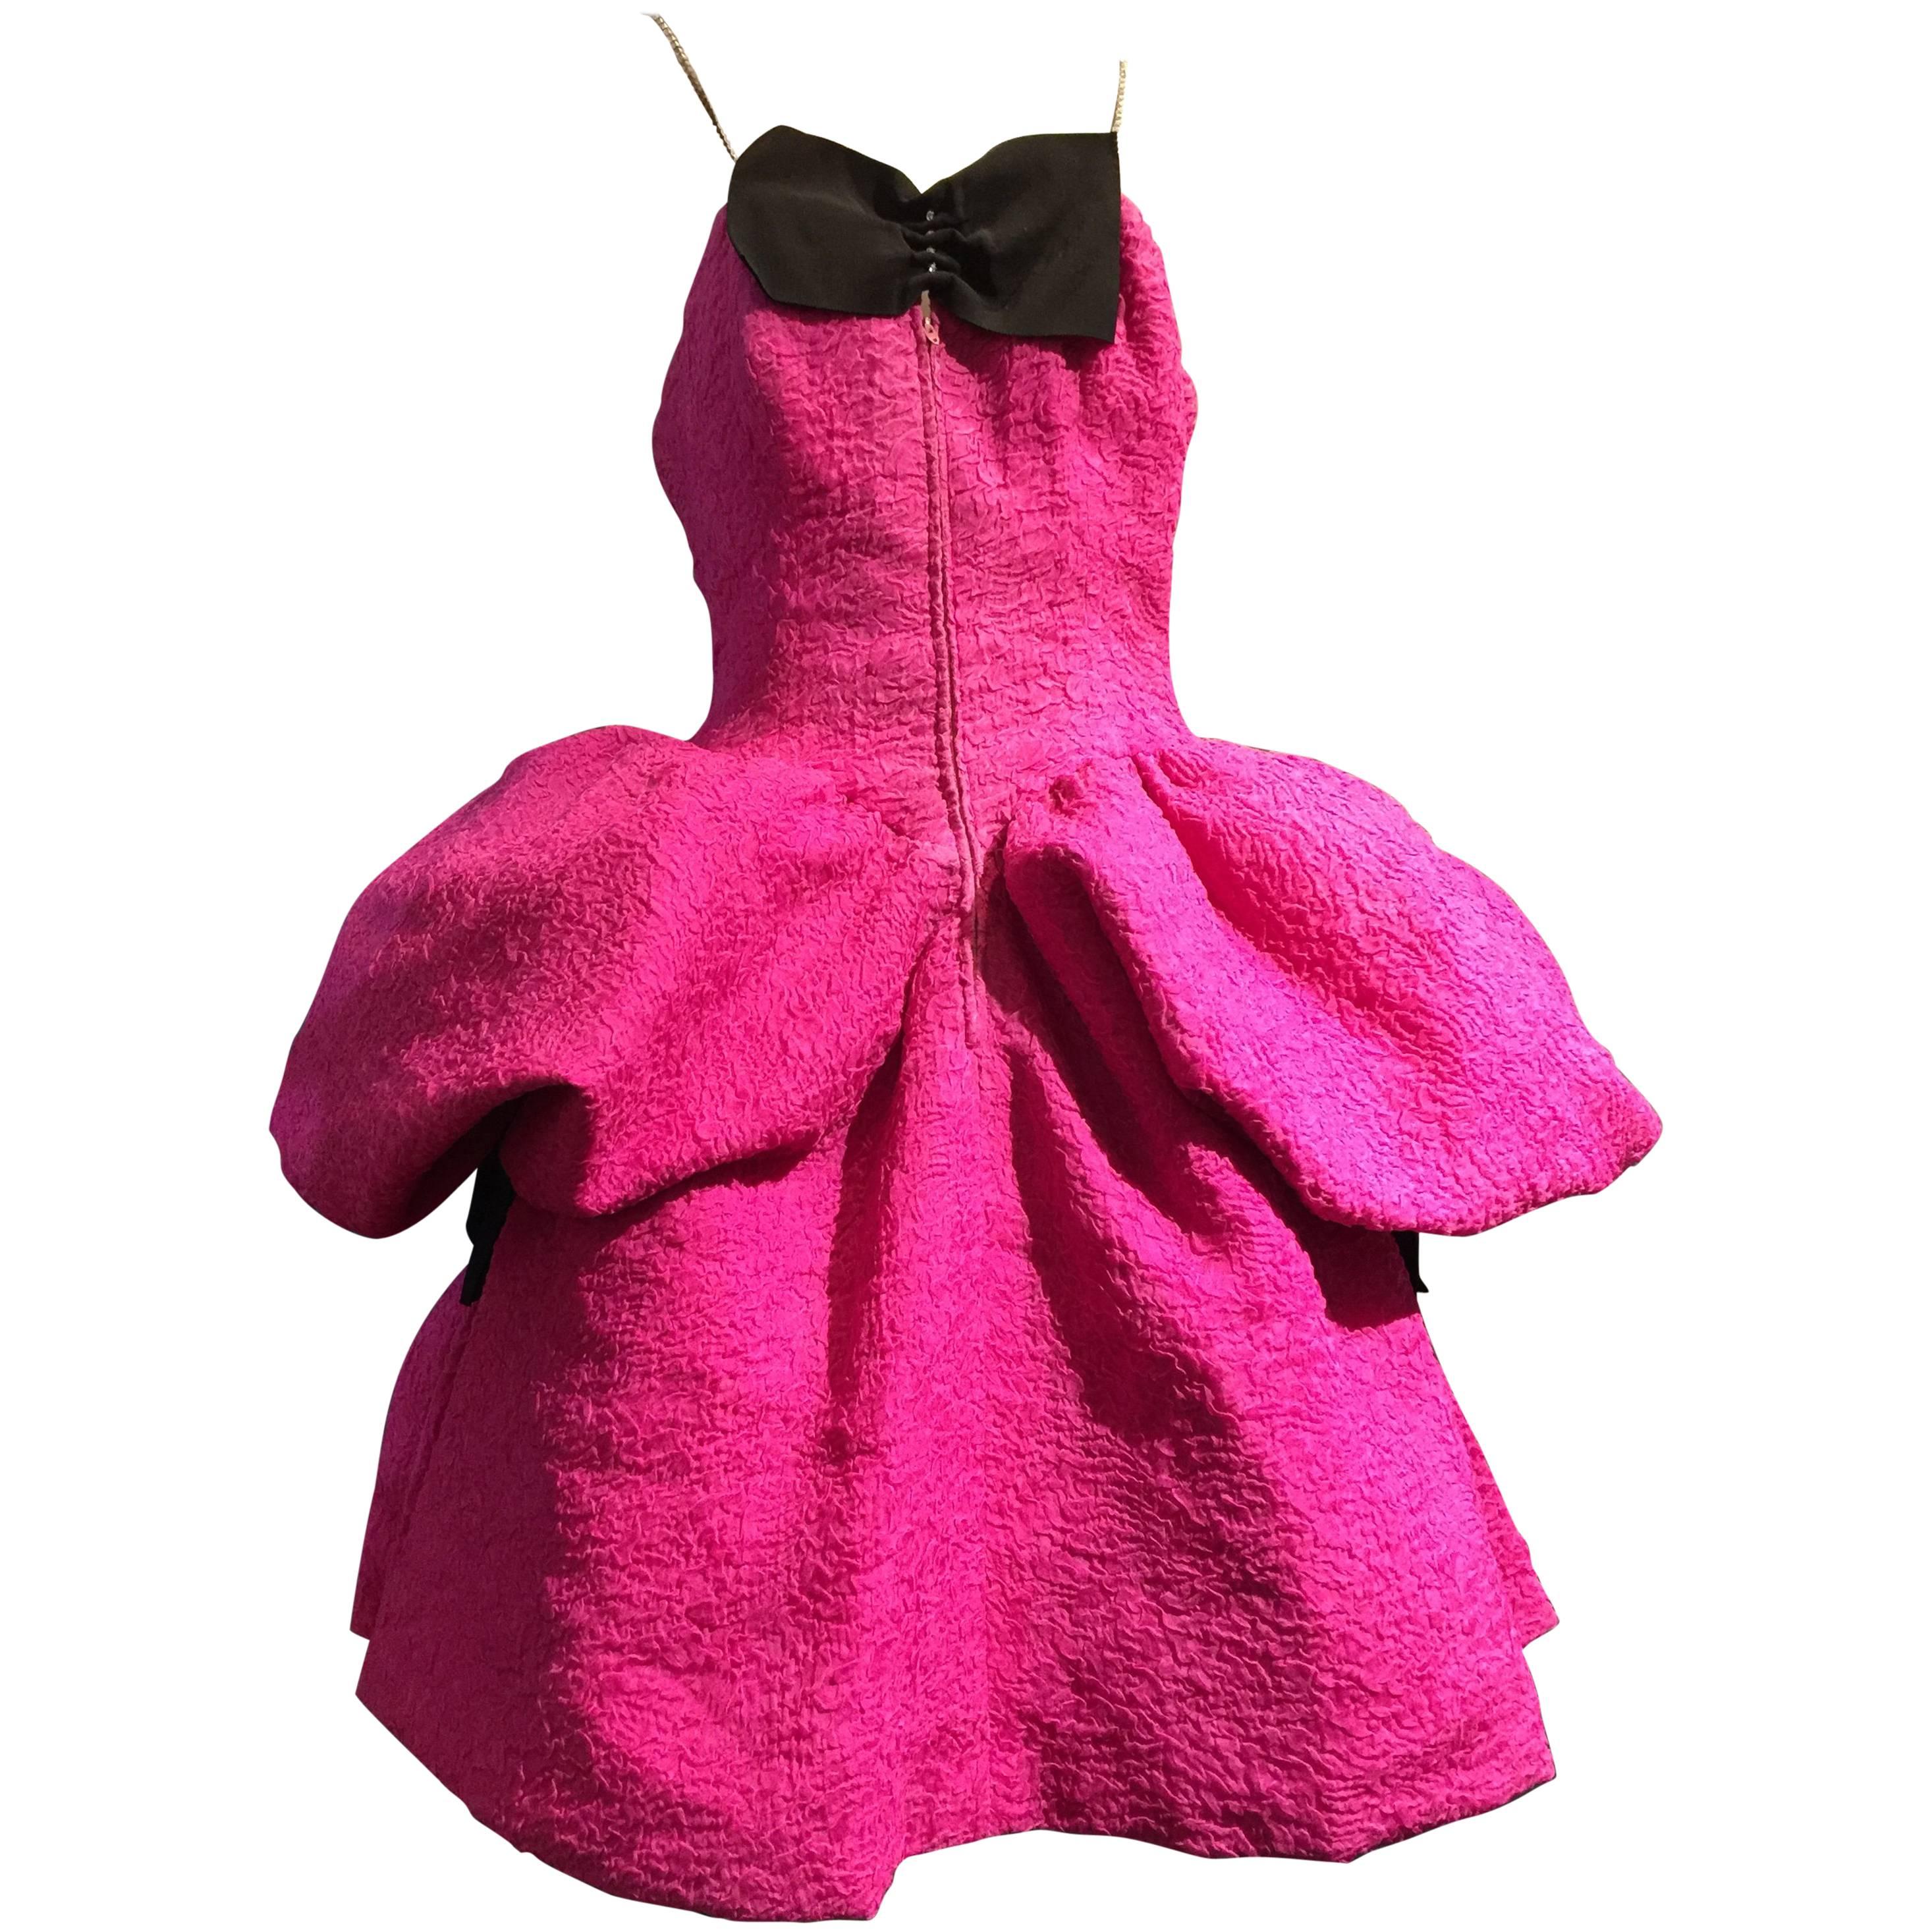 1980s Iconic Christian Lacroix Hot Pink Textured Silk Pouf Dress w Side Panels For Sale